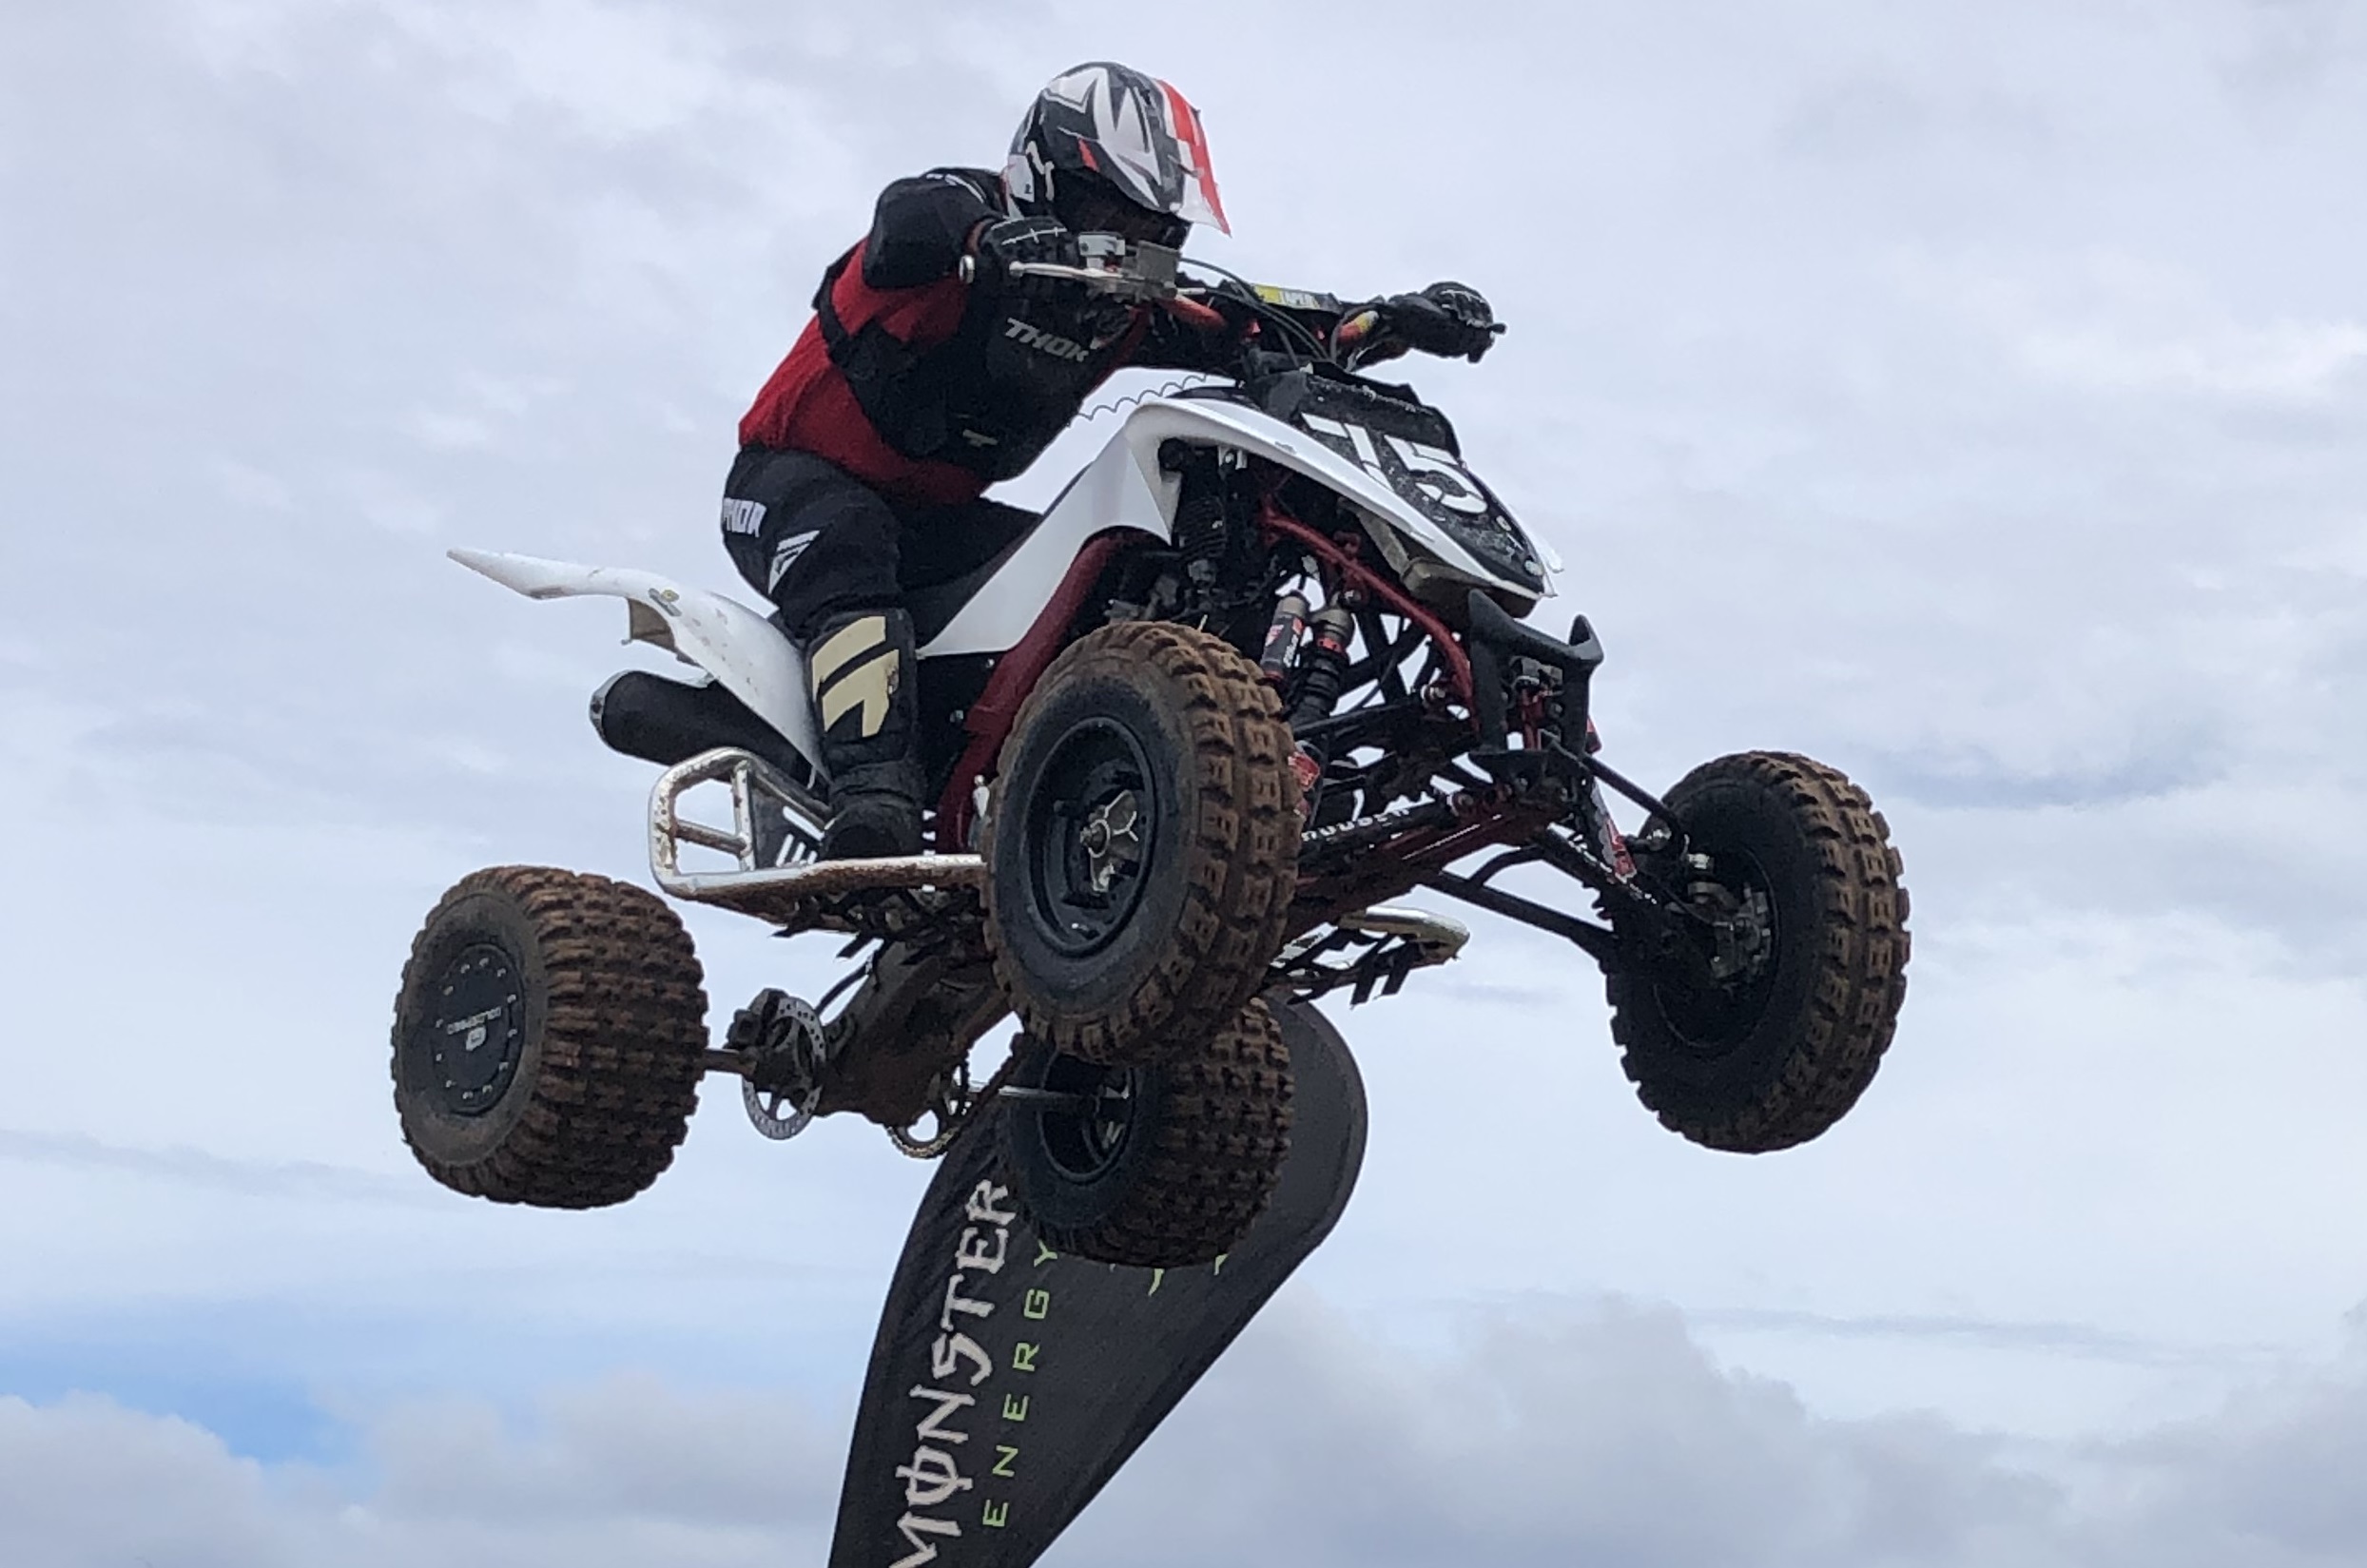 #75 George Santos took the Open Atv win Sunday at Round 4 of the Guam Championships